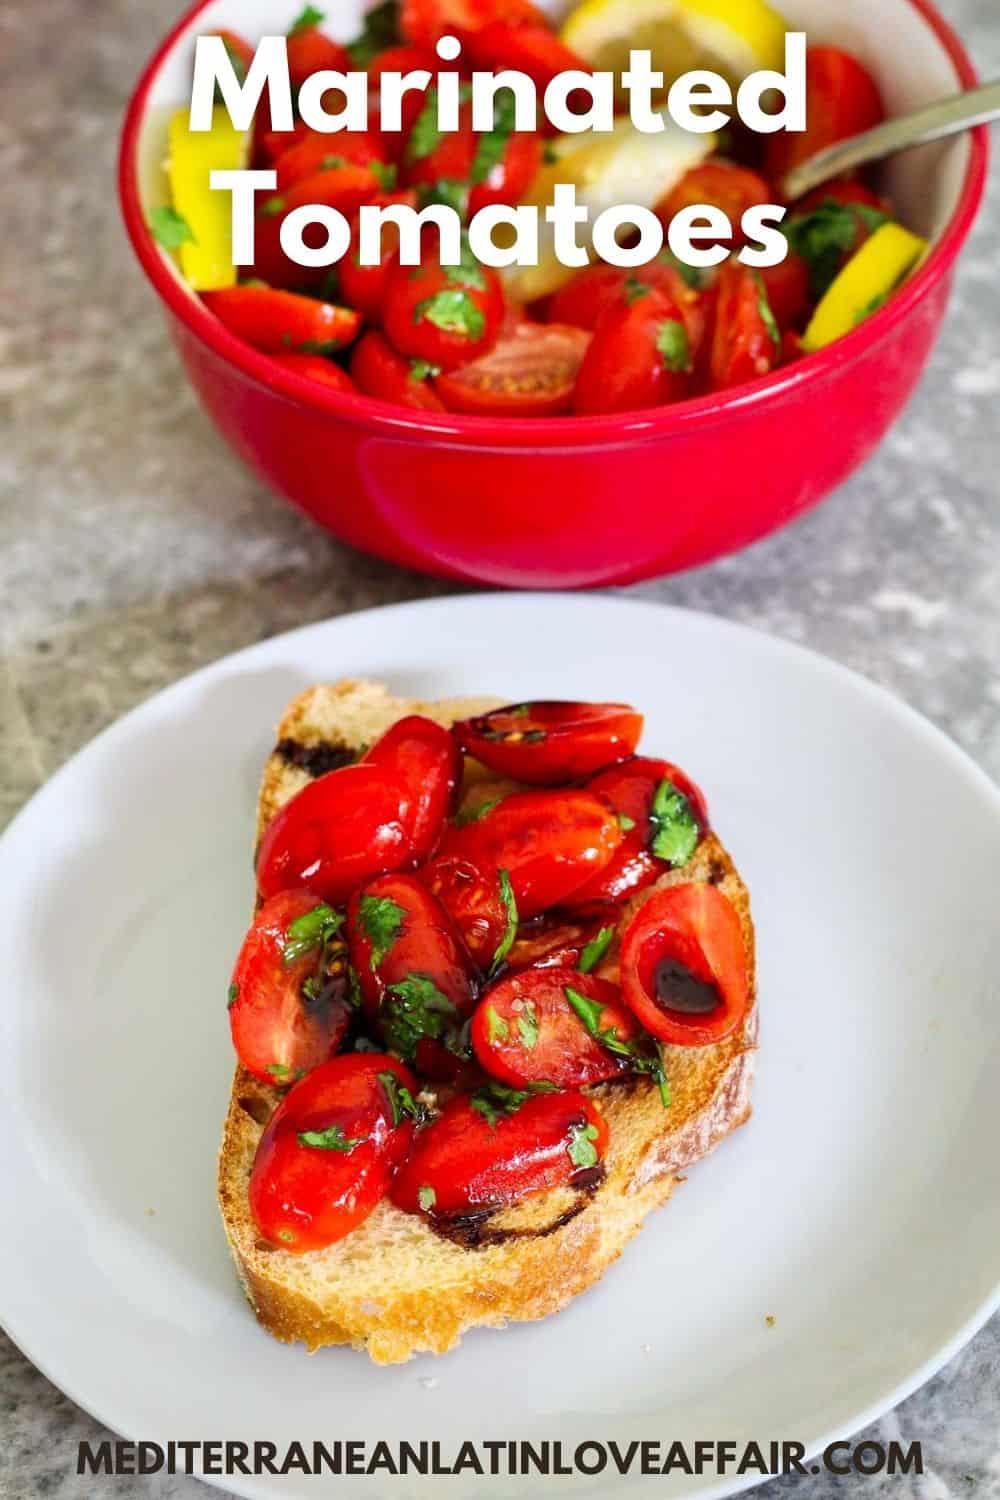 An image prepared for Pinterest: it has a picture from top to bottom showing a bowl of marinated cherry tomatoes and a toasted bread topped with the tomatoes. Then on top of the picture there's a title bar and the bottom has a website link.